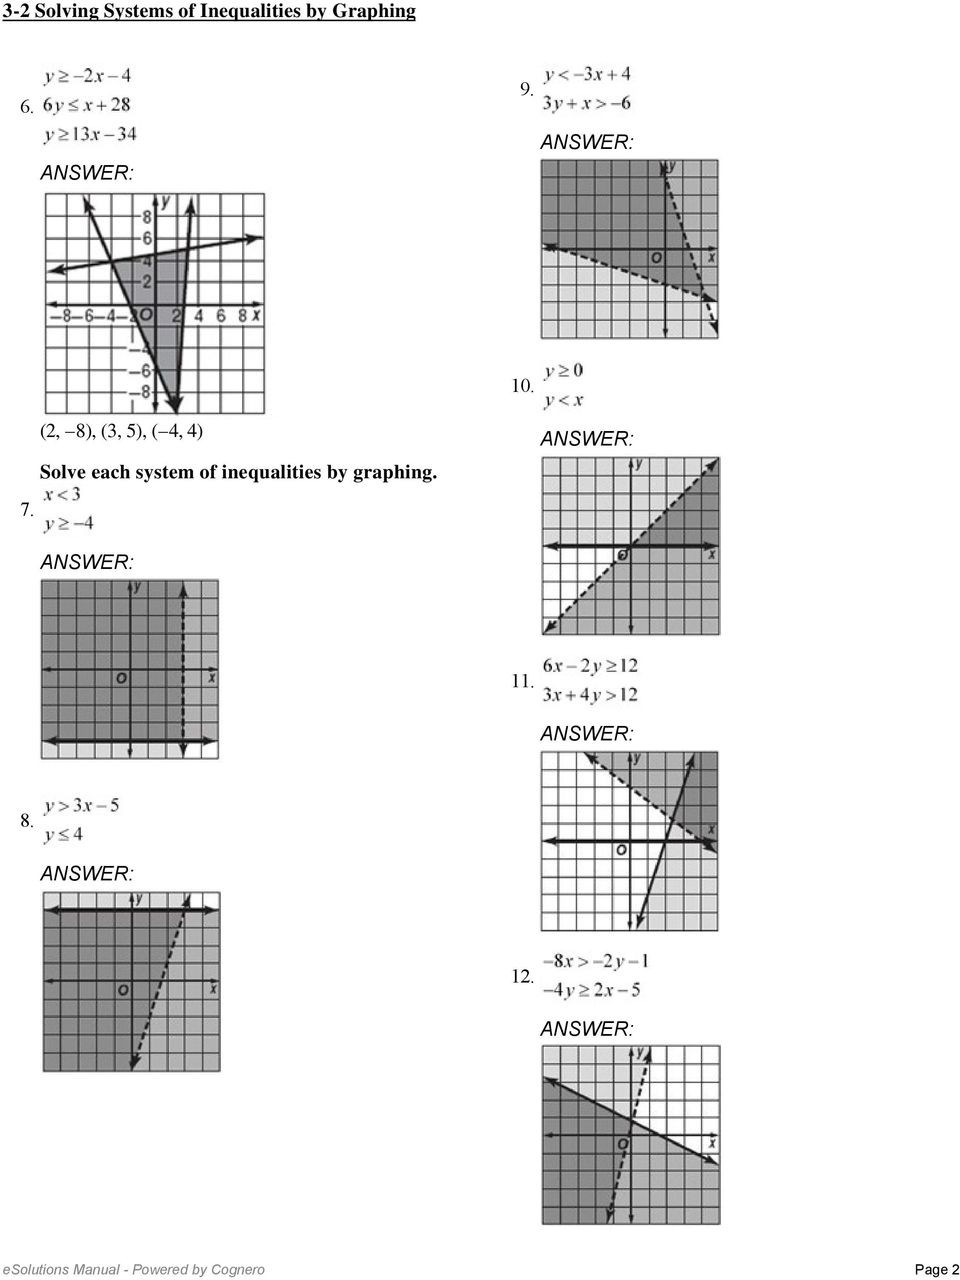 Solving Systems Of Inequalities Worksheet 3 2 solving Systems Of Inequalities by Graphing solve Each